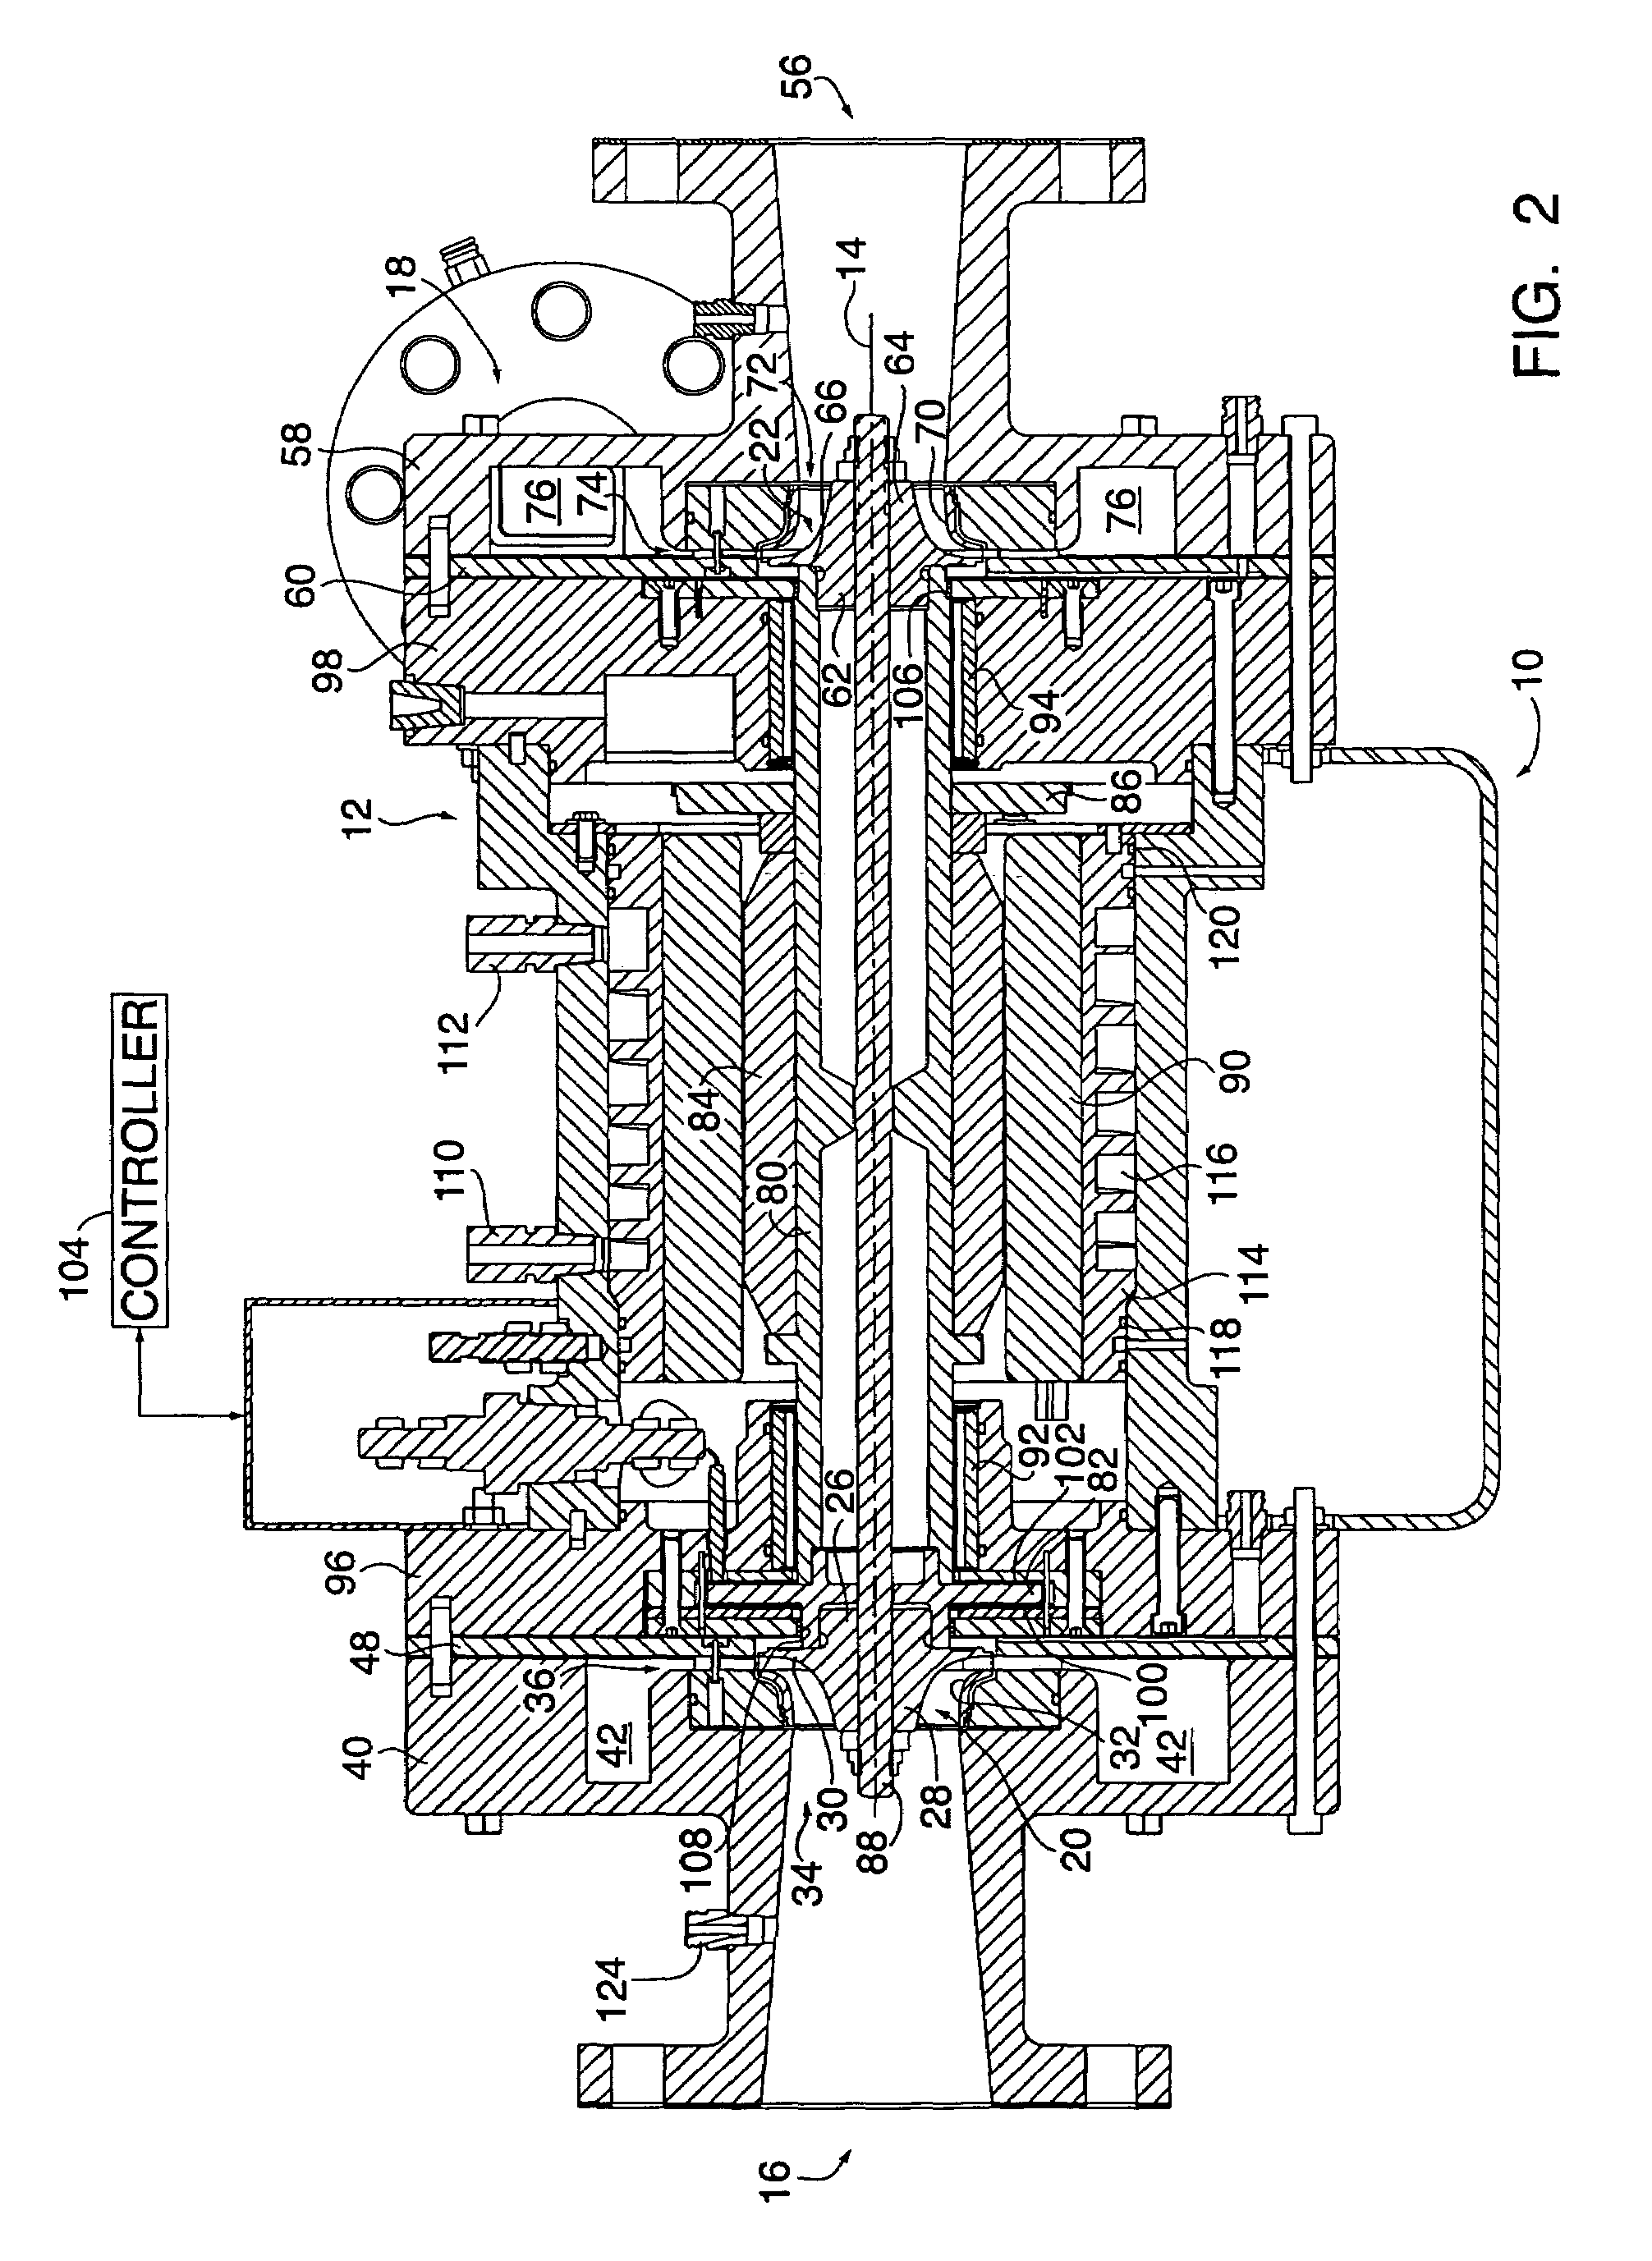 Motor driven two-stage centrifugal air-conditioning compressor